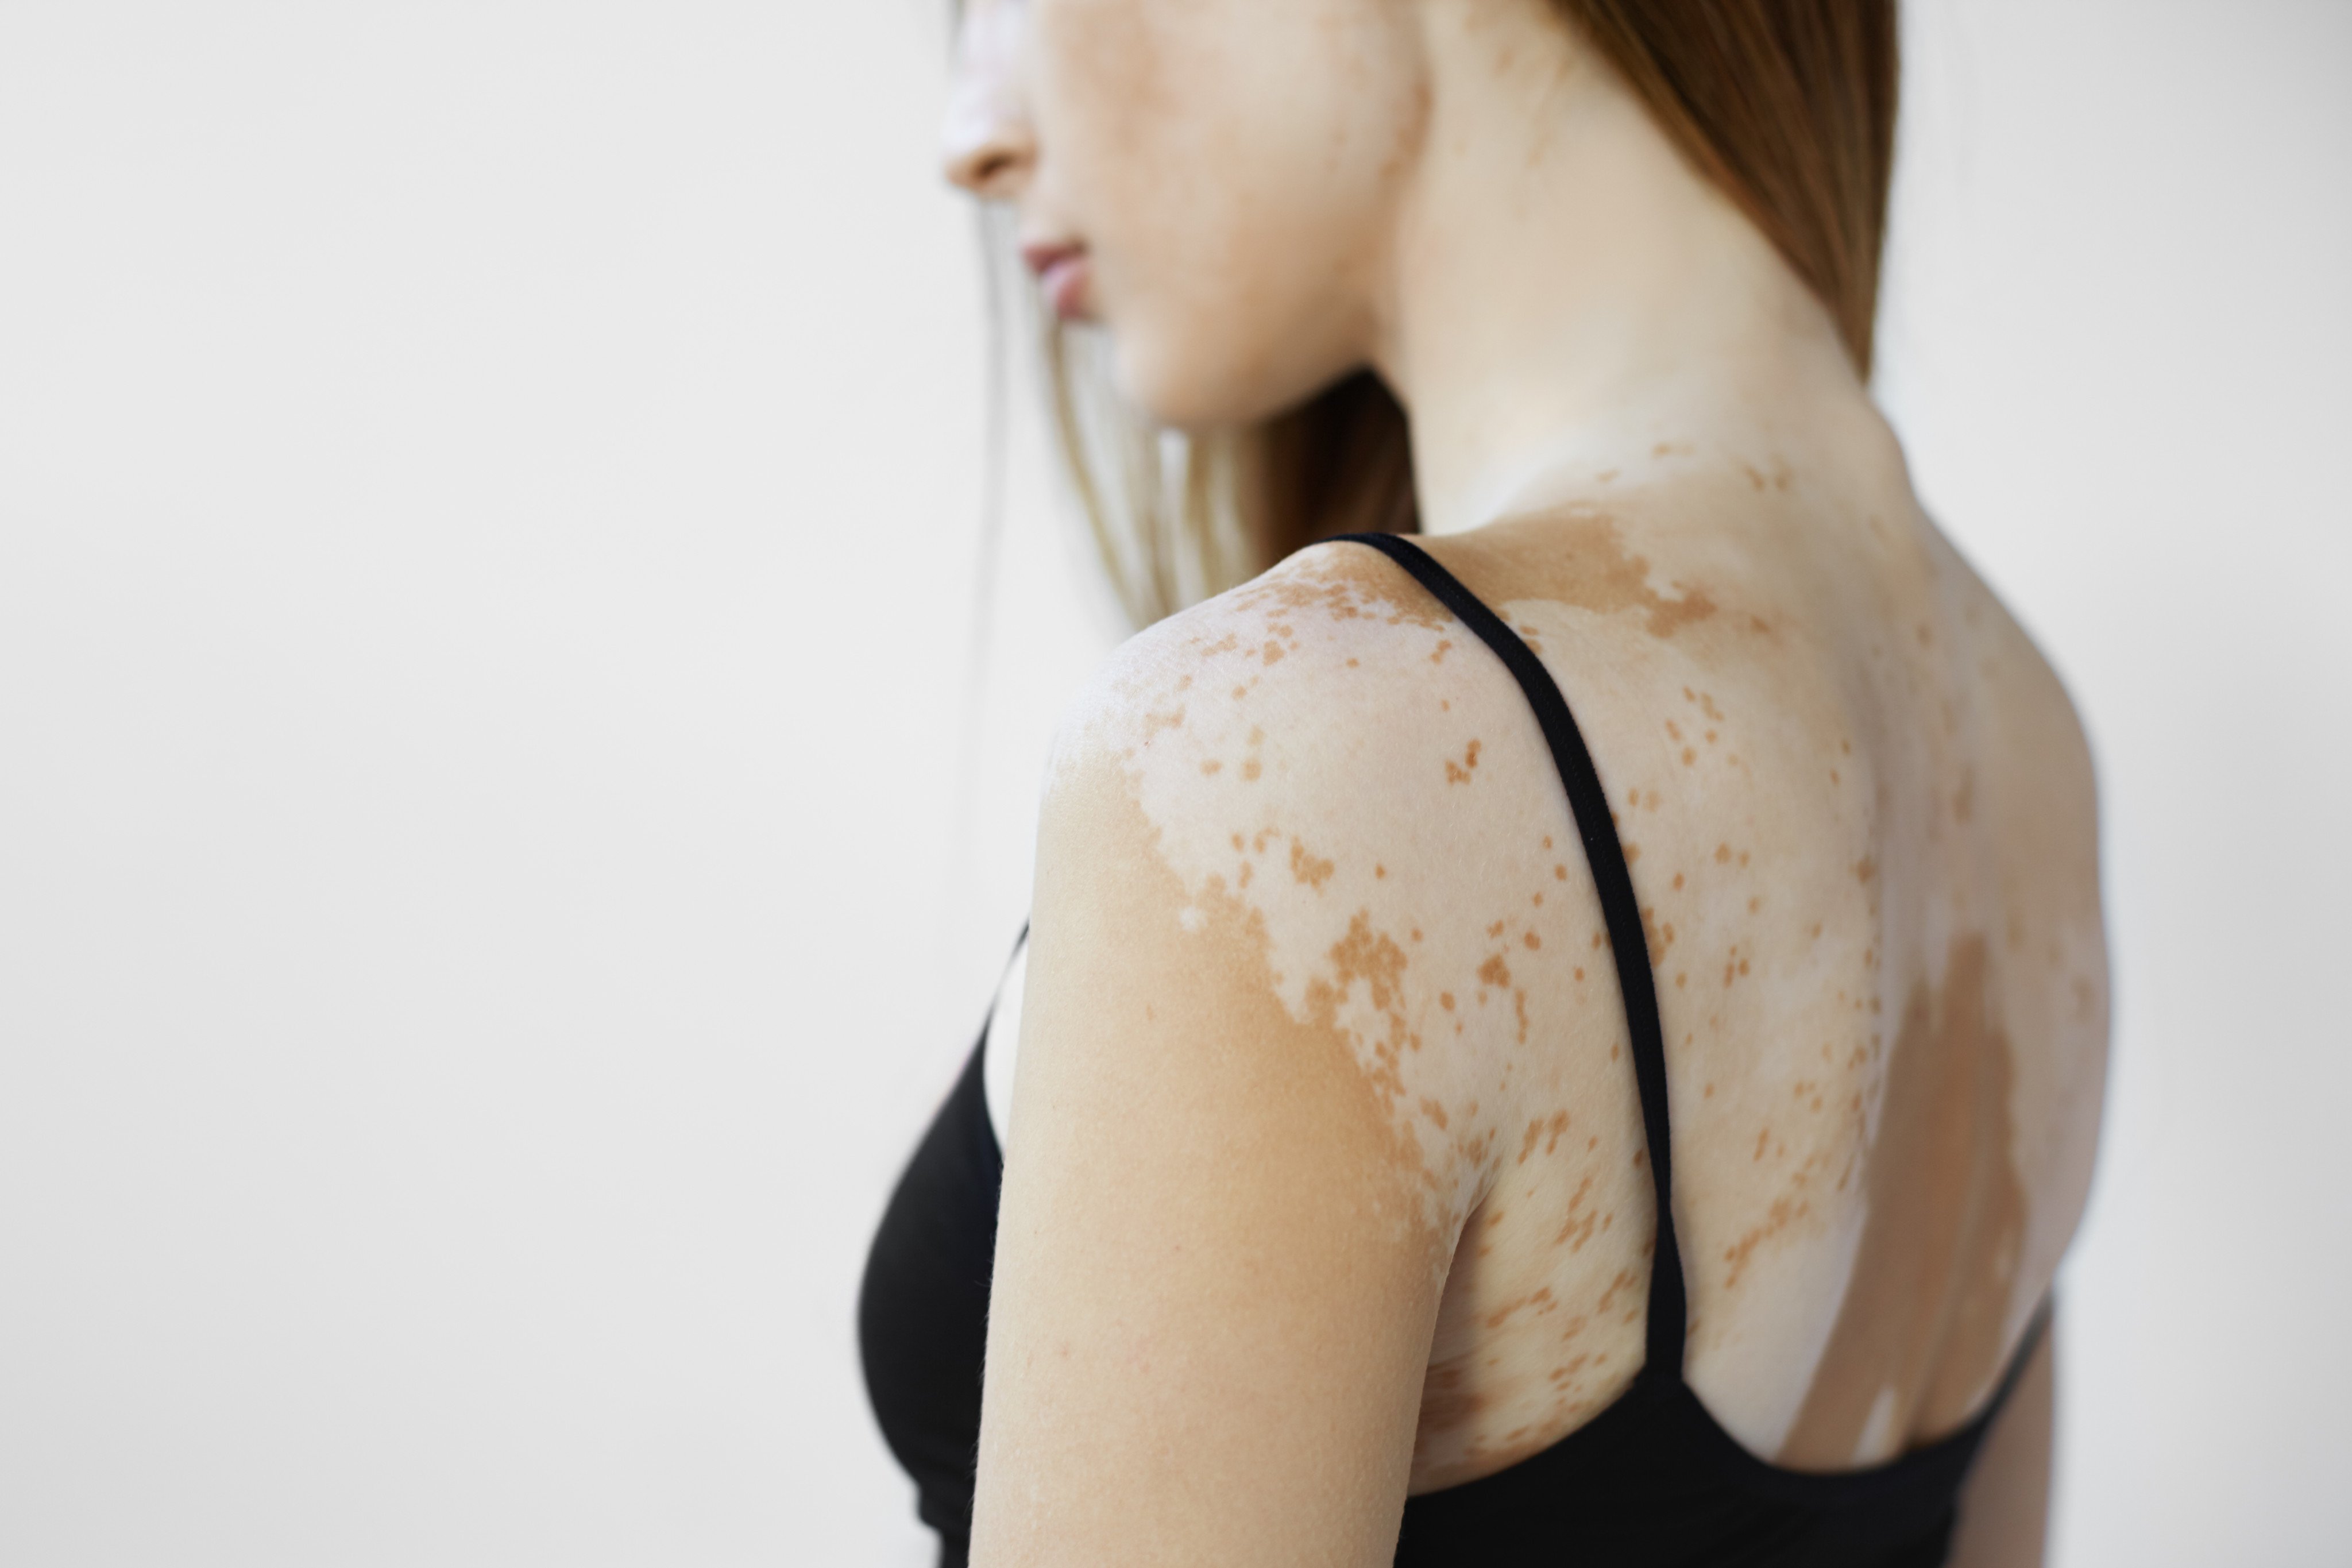 Vitiligo – the development of pale white patches on the skin caused by a lack of melanin – can strip a sufferer of self-confidence and stop them taking part in social events. Photo: Shutterstock